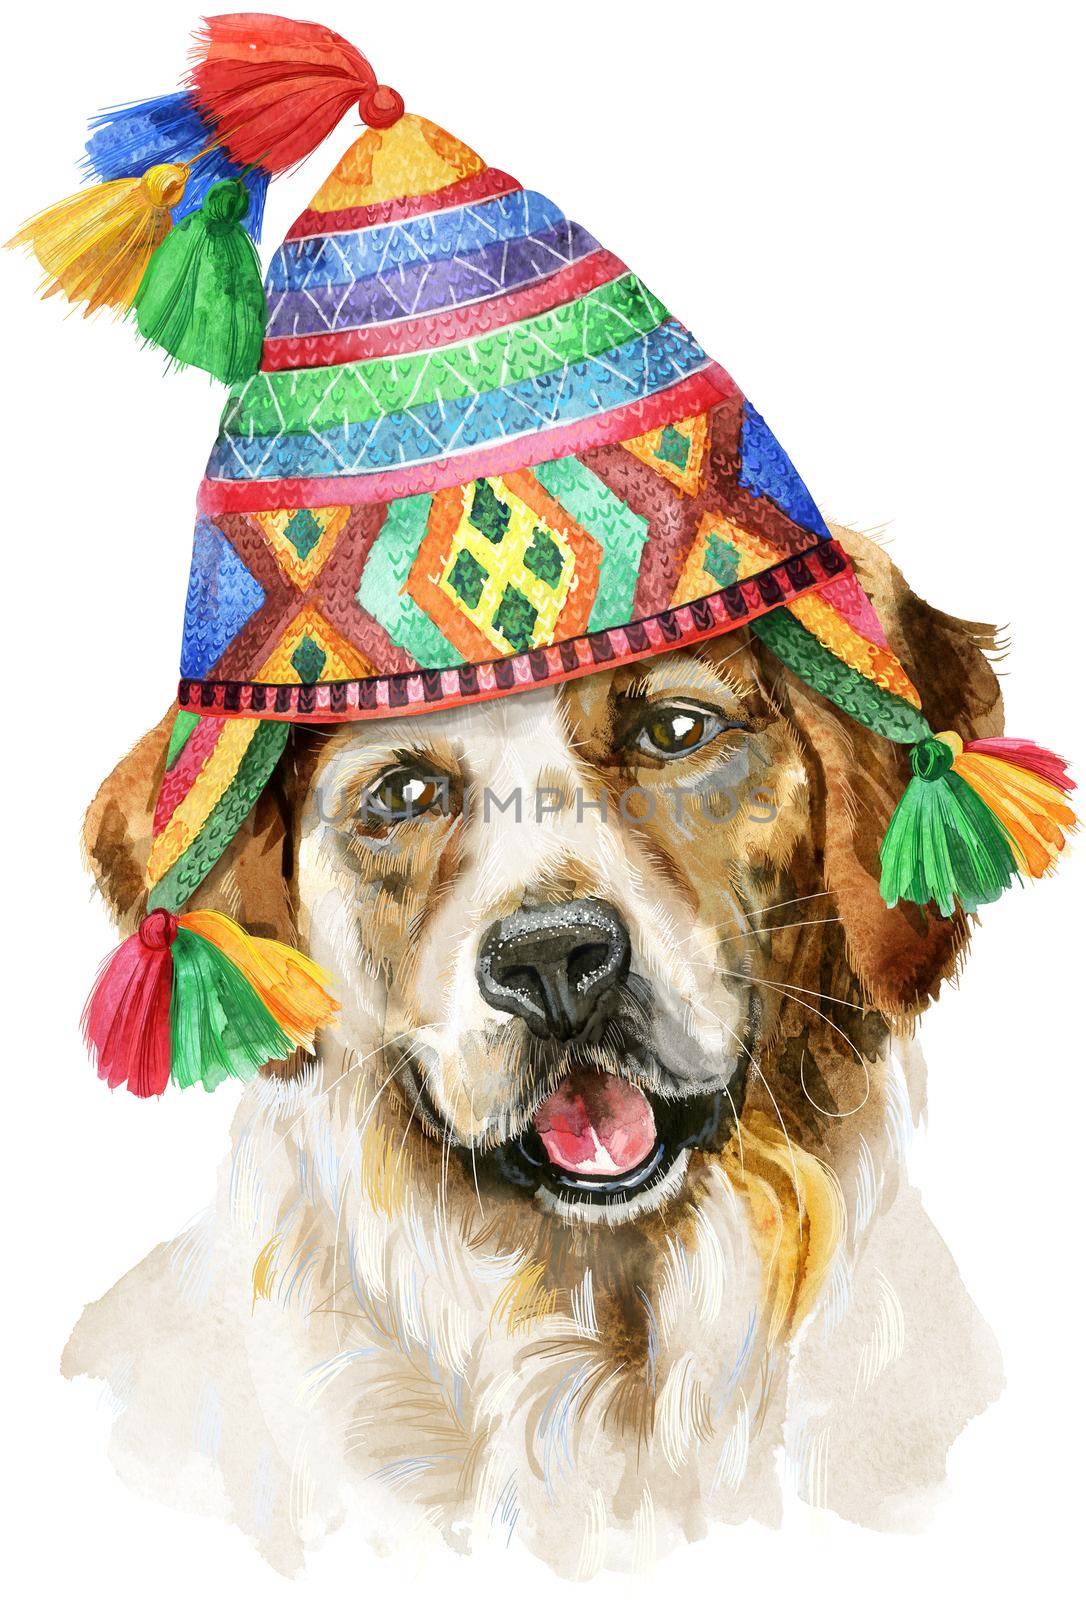 Cute Dog in chullo hat. Dog T-shirt graphics. watercolor tricolor dog illustration